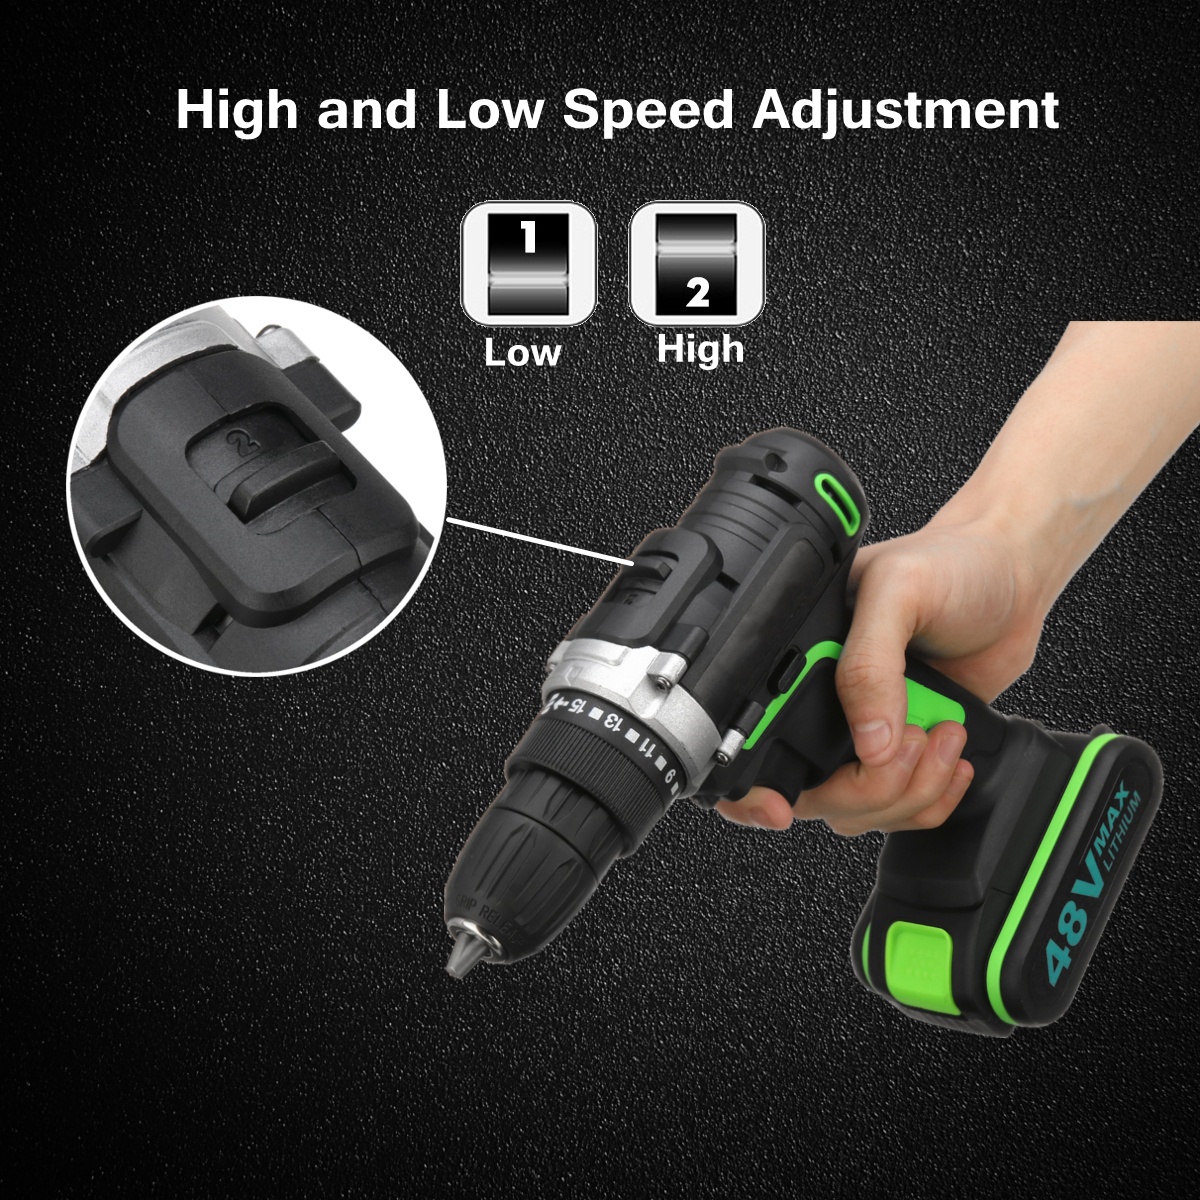 48V 3 In 1 Drilling Tool 15+1 Torque Dual Speed Power Drills Electric Lithium Battery Driller